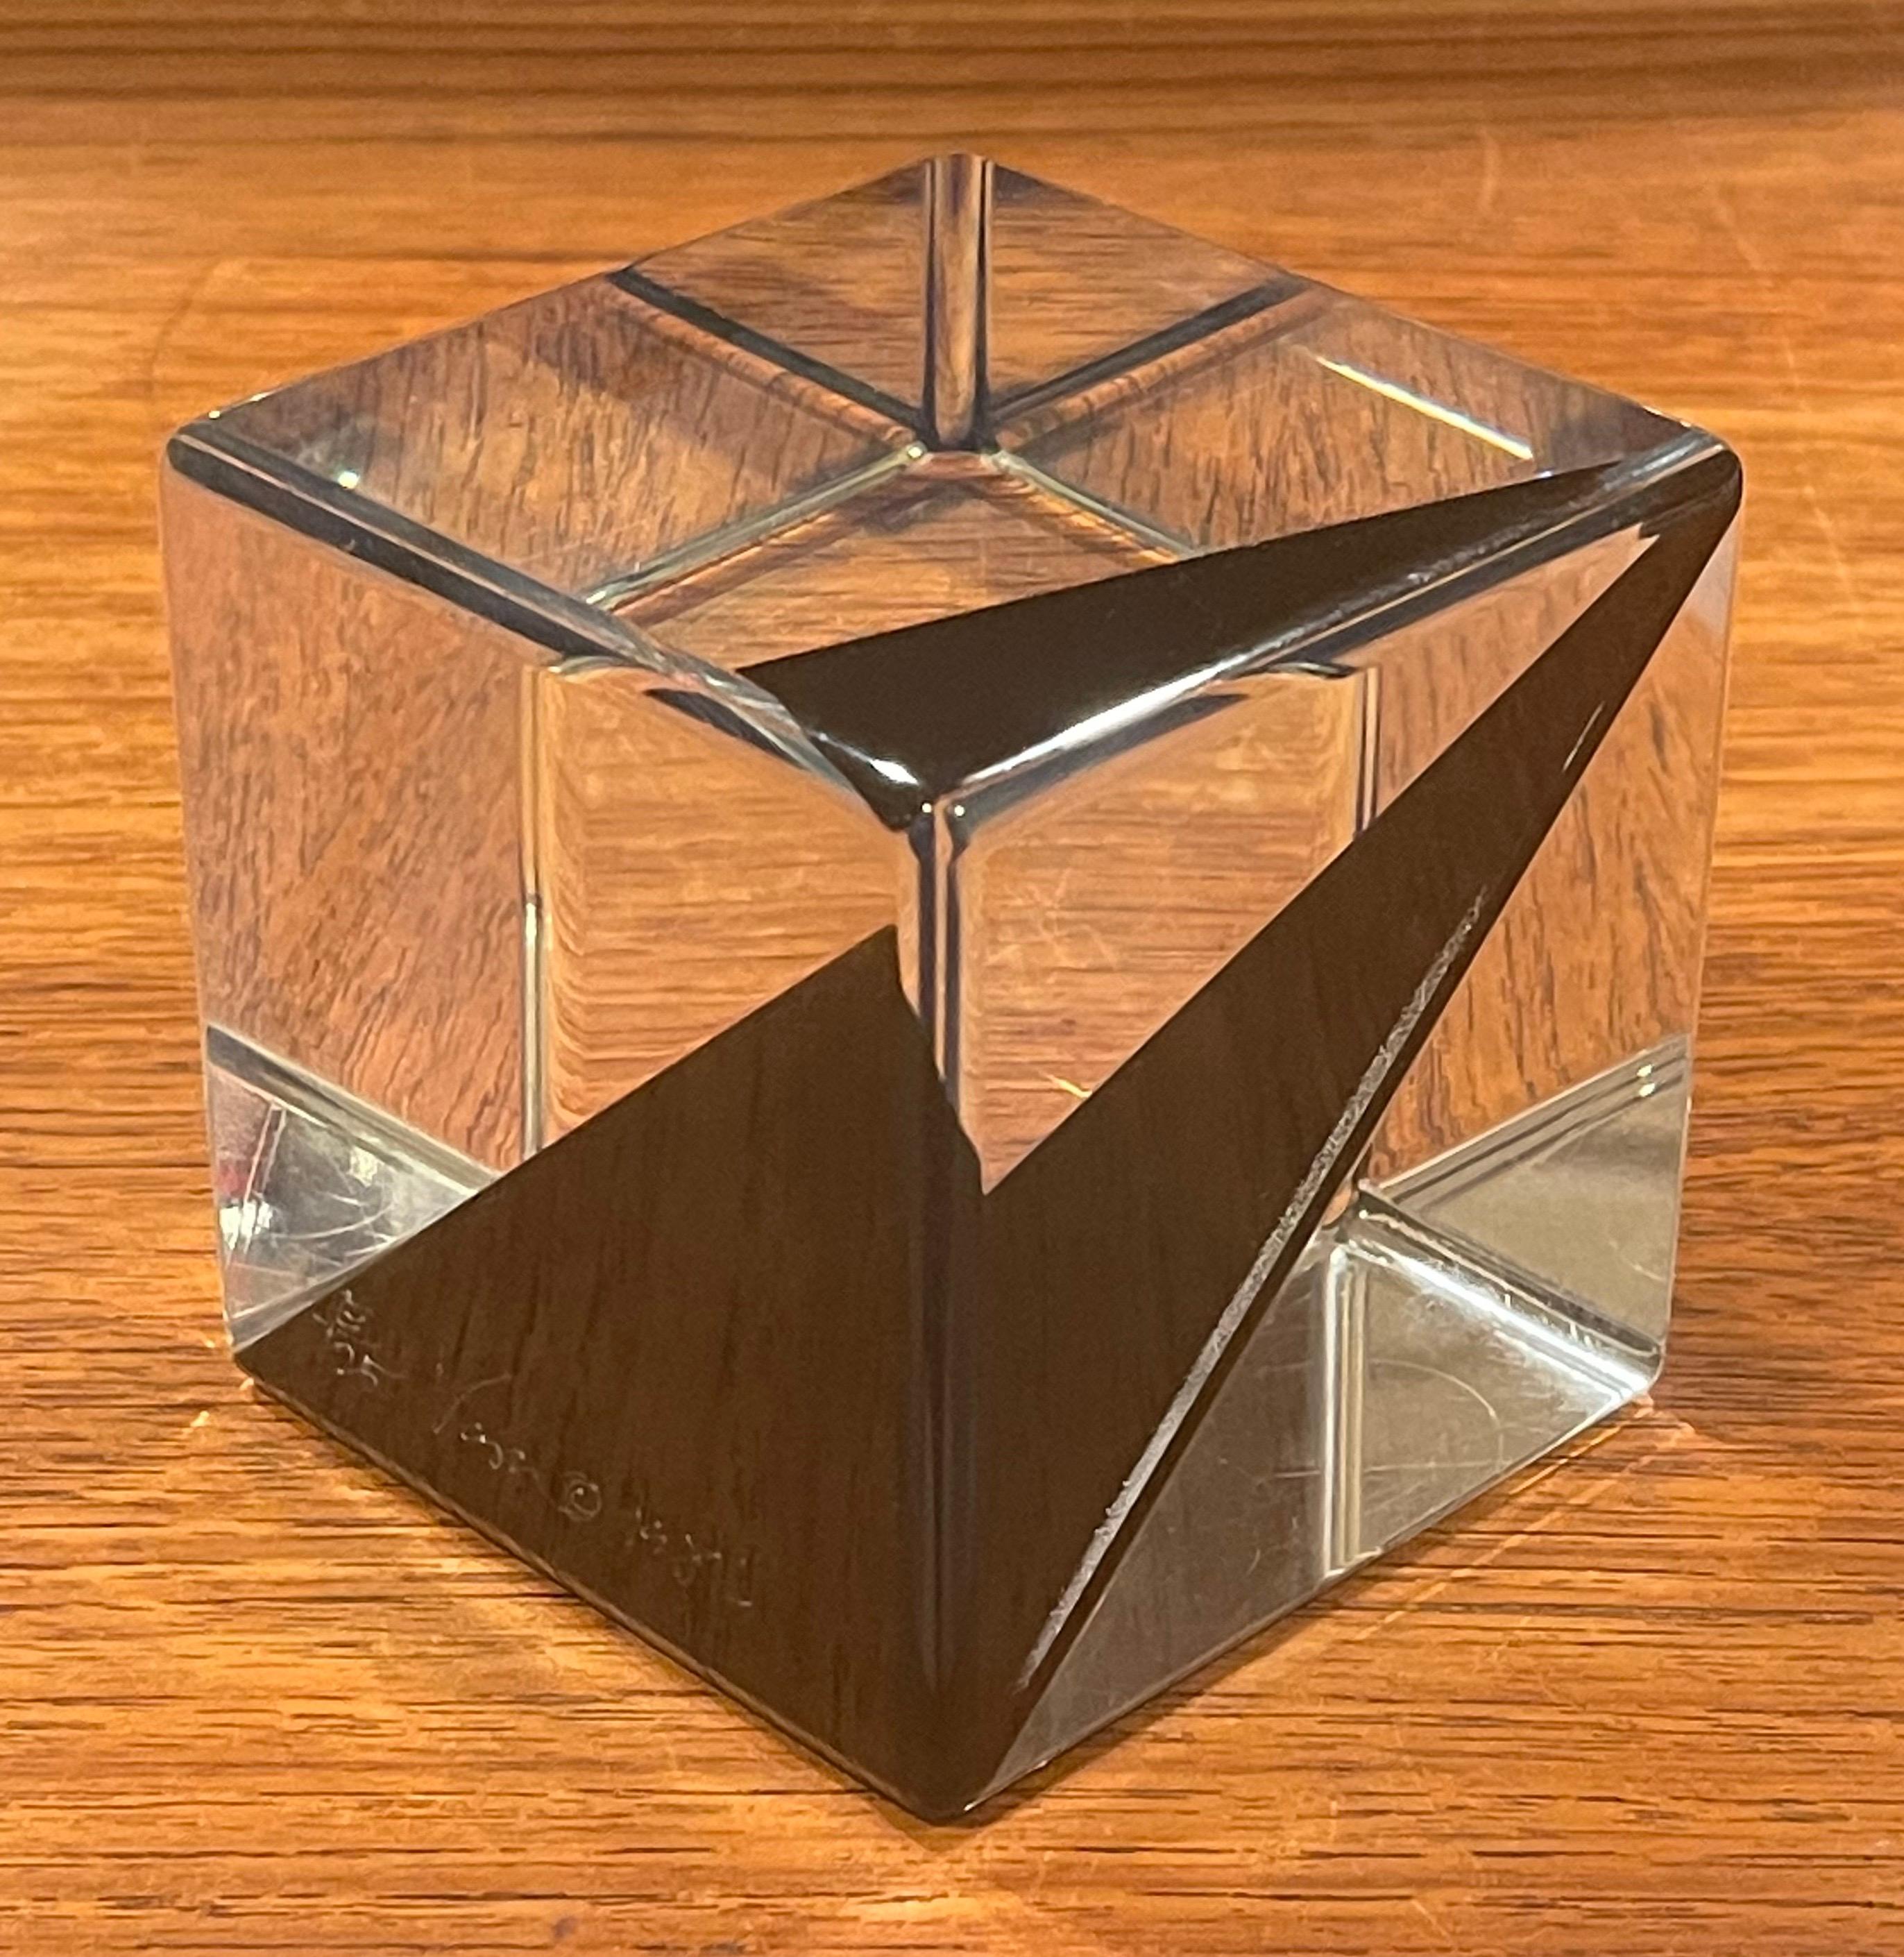 American Op Art Acrylic Cube Sculpture by Vasa Mihich For Sale